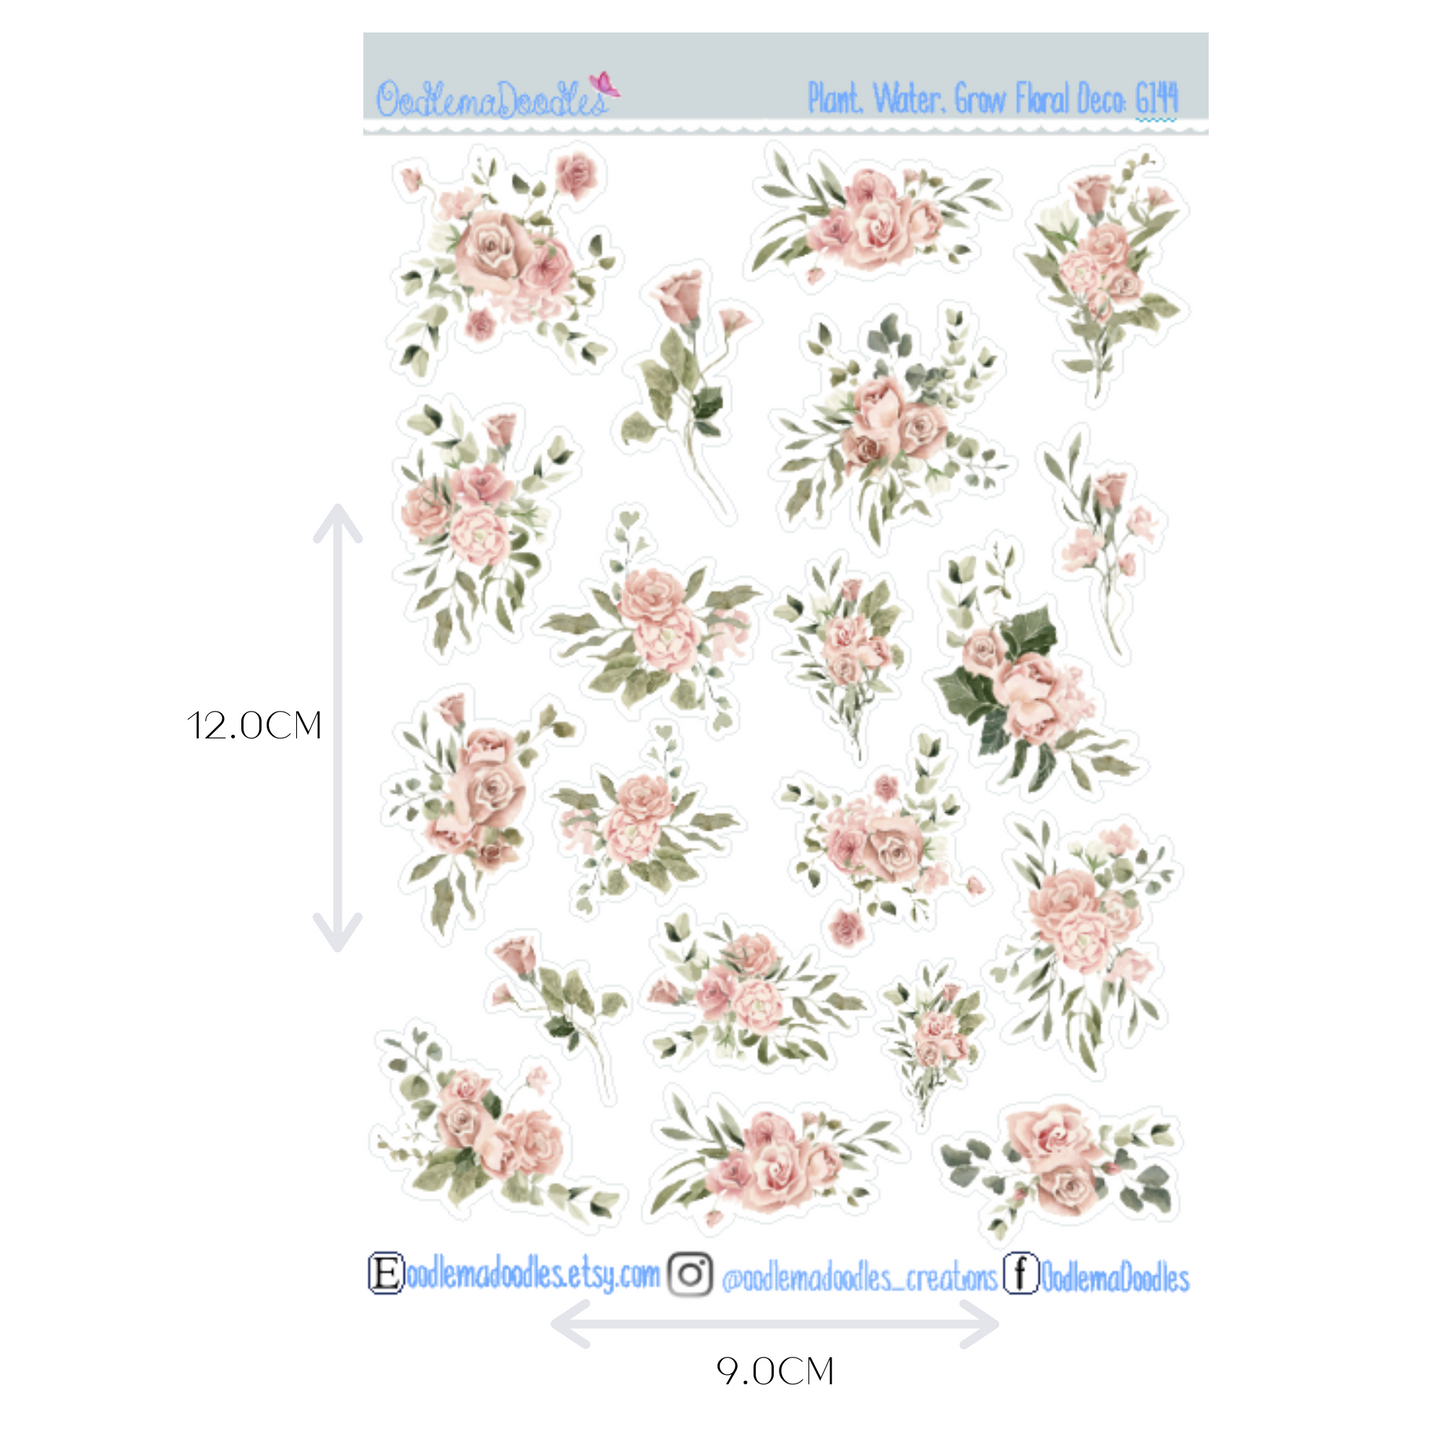 Plant Water Grow Floral Decorative Stickers